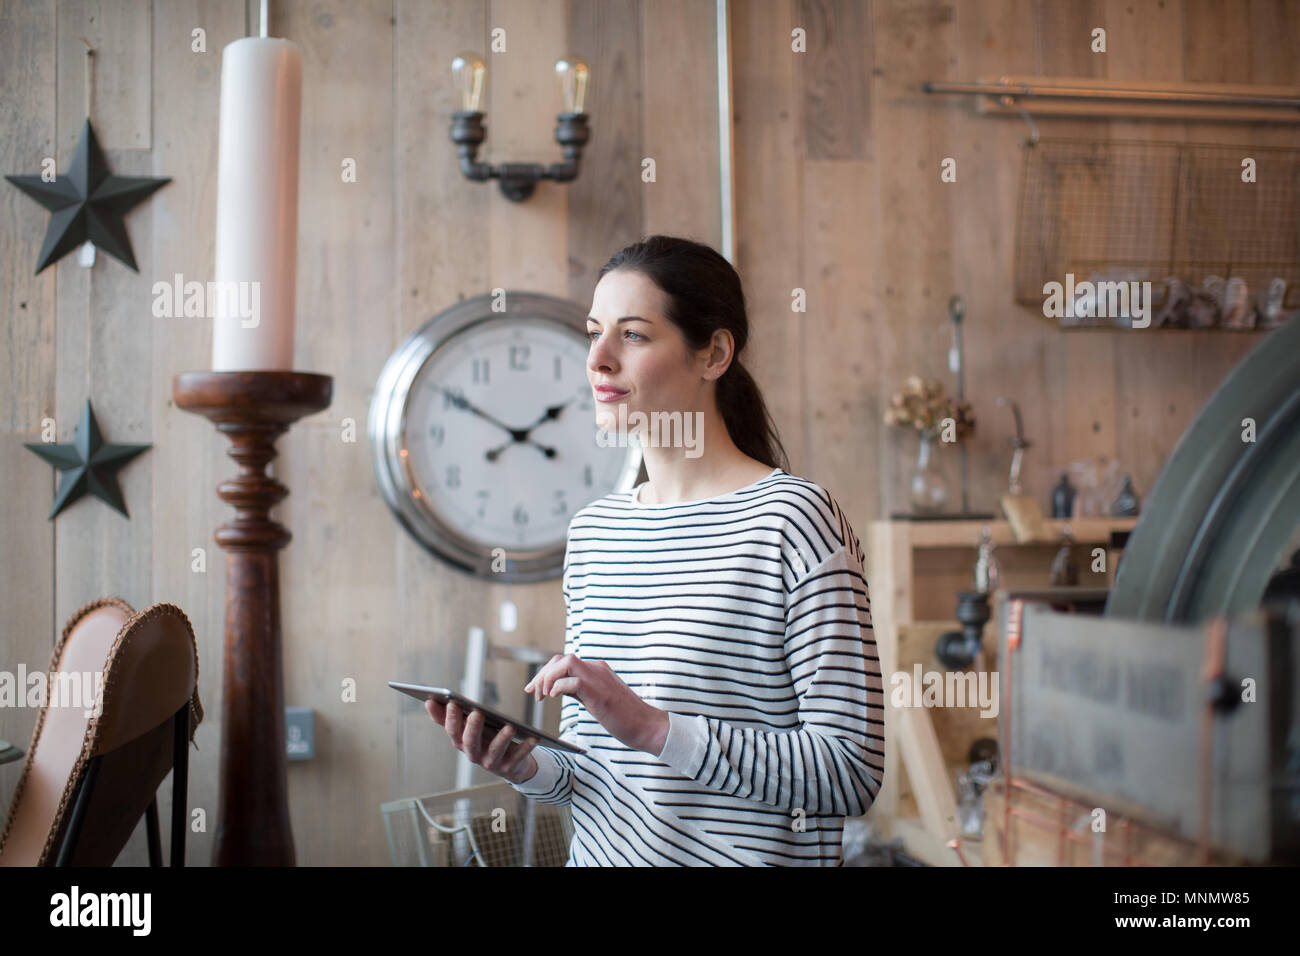 Small business owner using digital tablet in a store Stock Photo